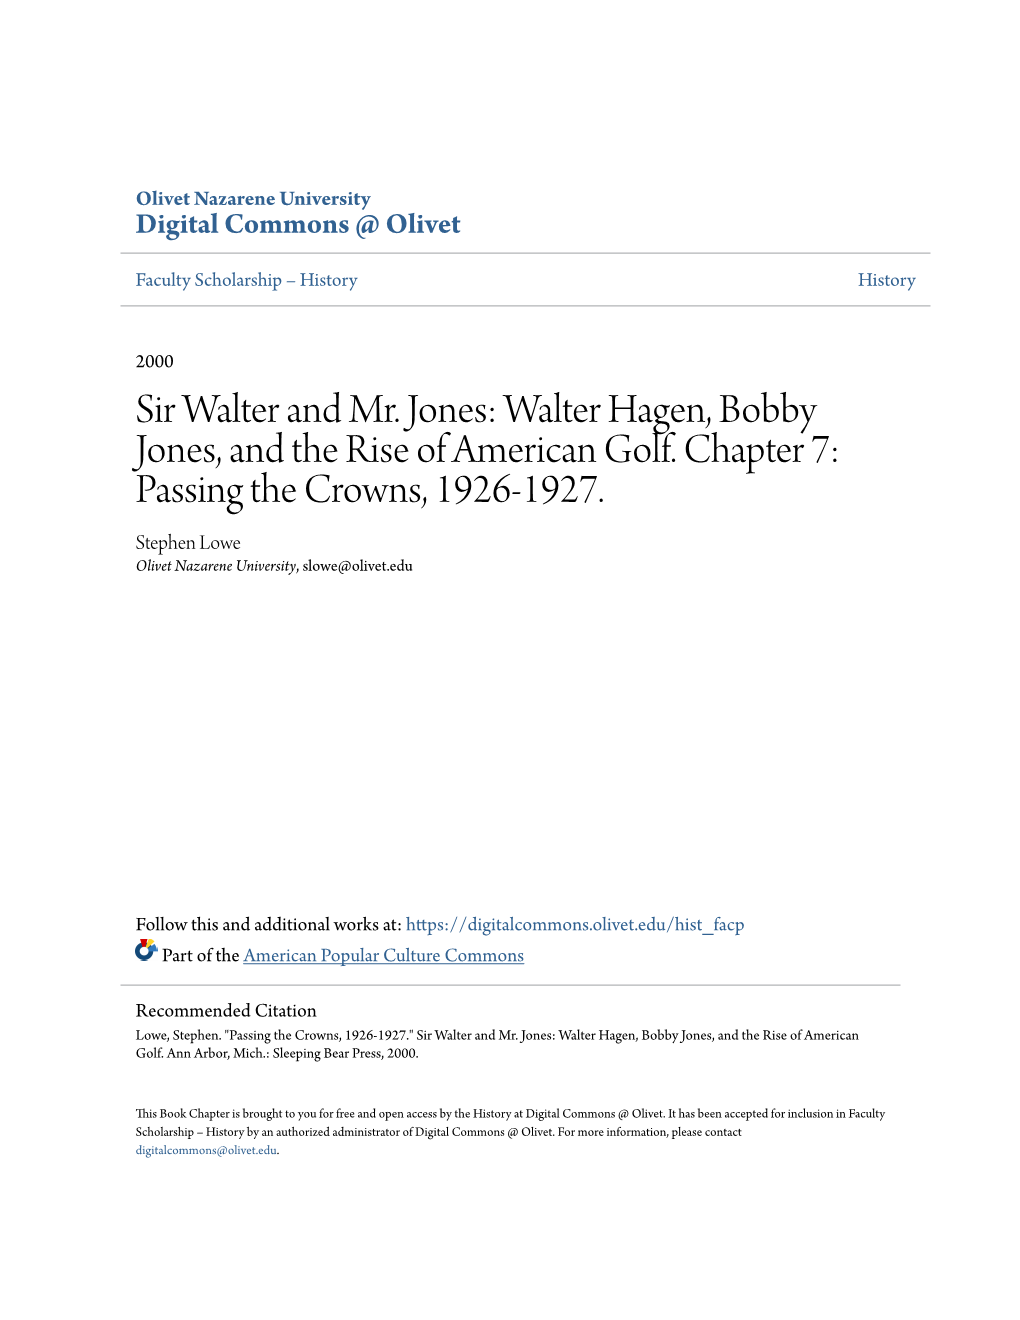 Walter Hagen, Bobby Jones, and the Rise of American Golf. Chapter 7: Passing the Crowns, 1926-1927